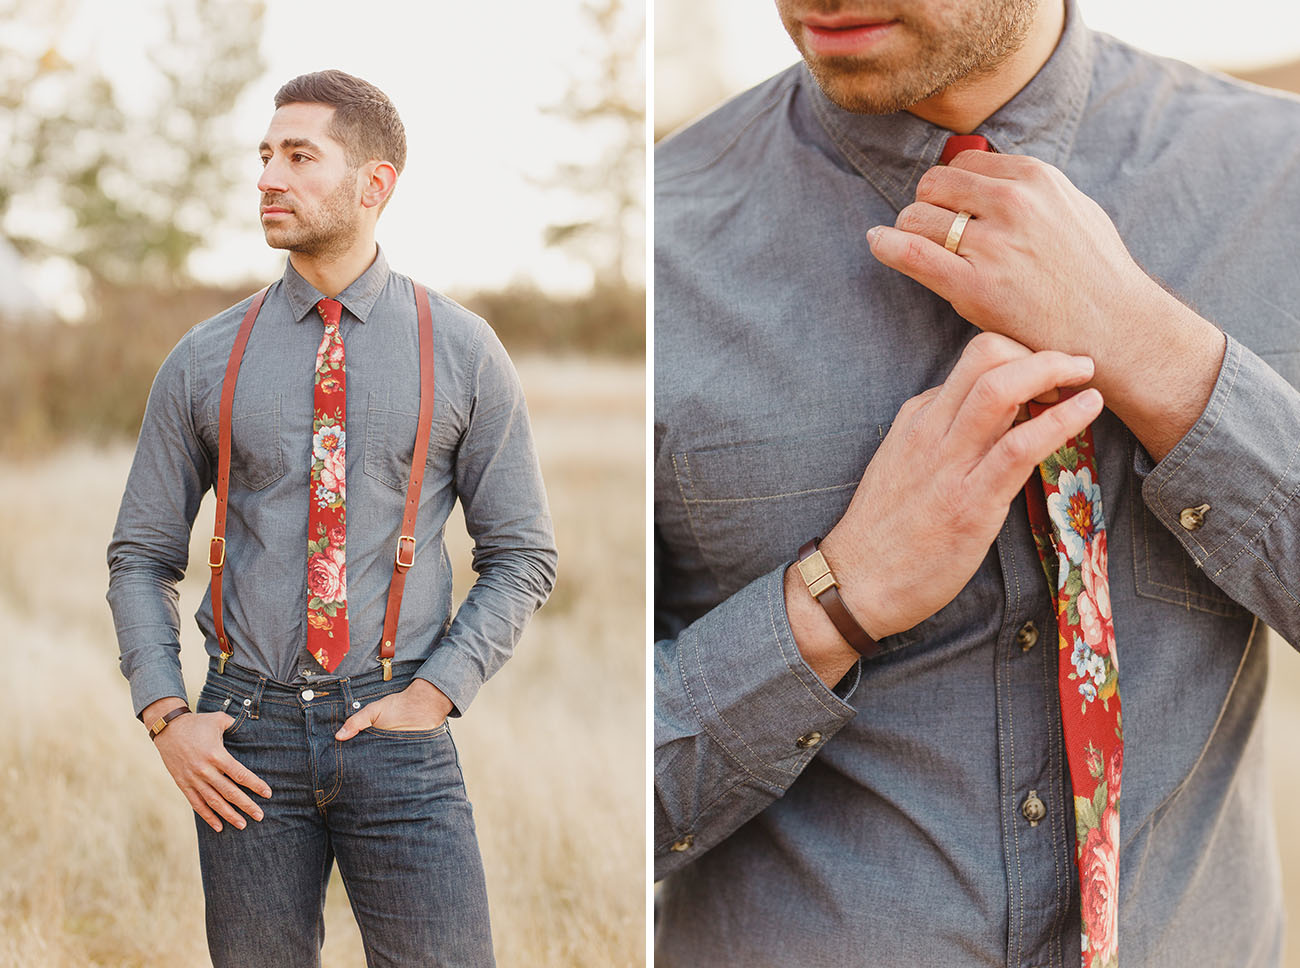 The groom was dressed in black jeans, a grey chambray shirt, leather suspenders and a floral tie